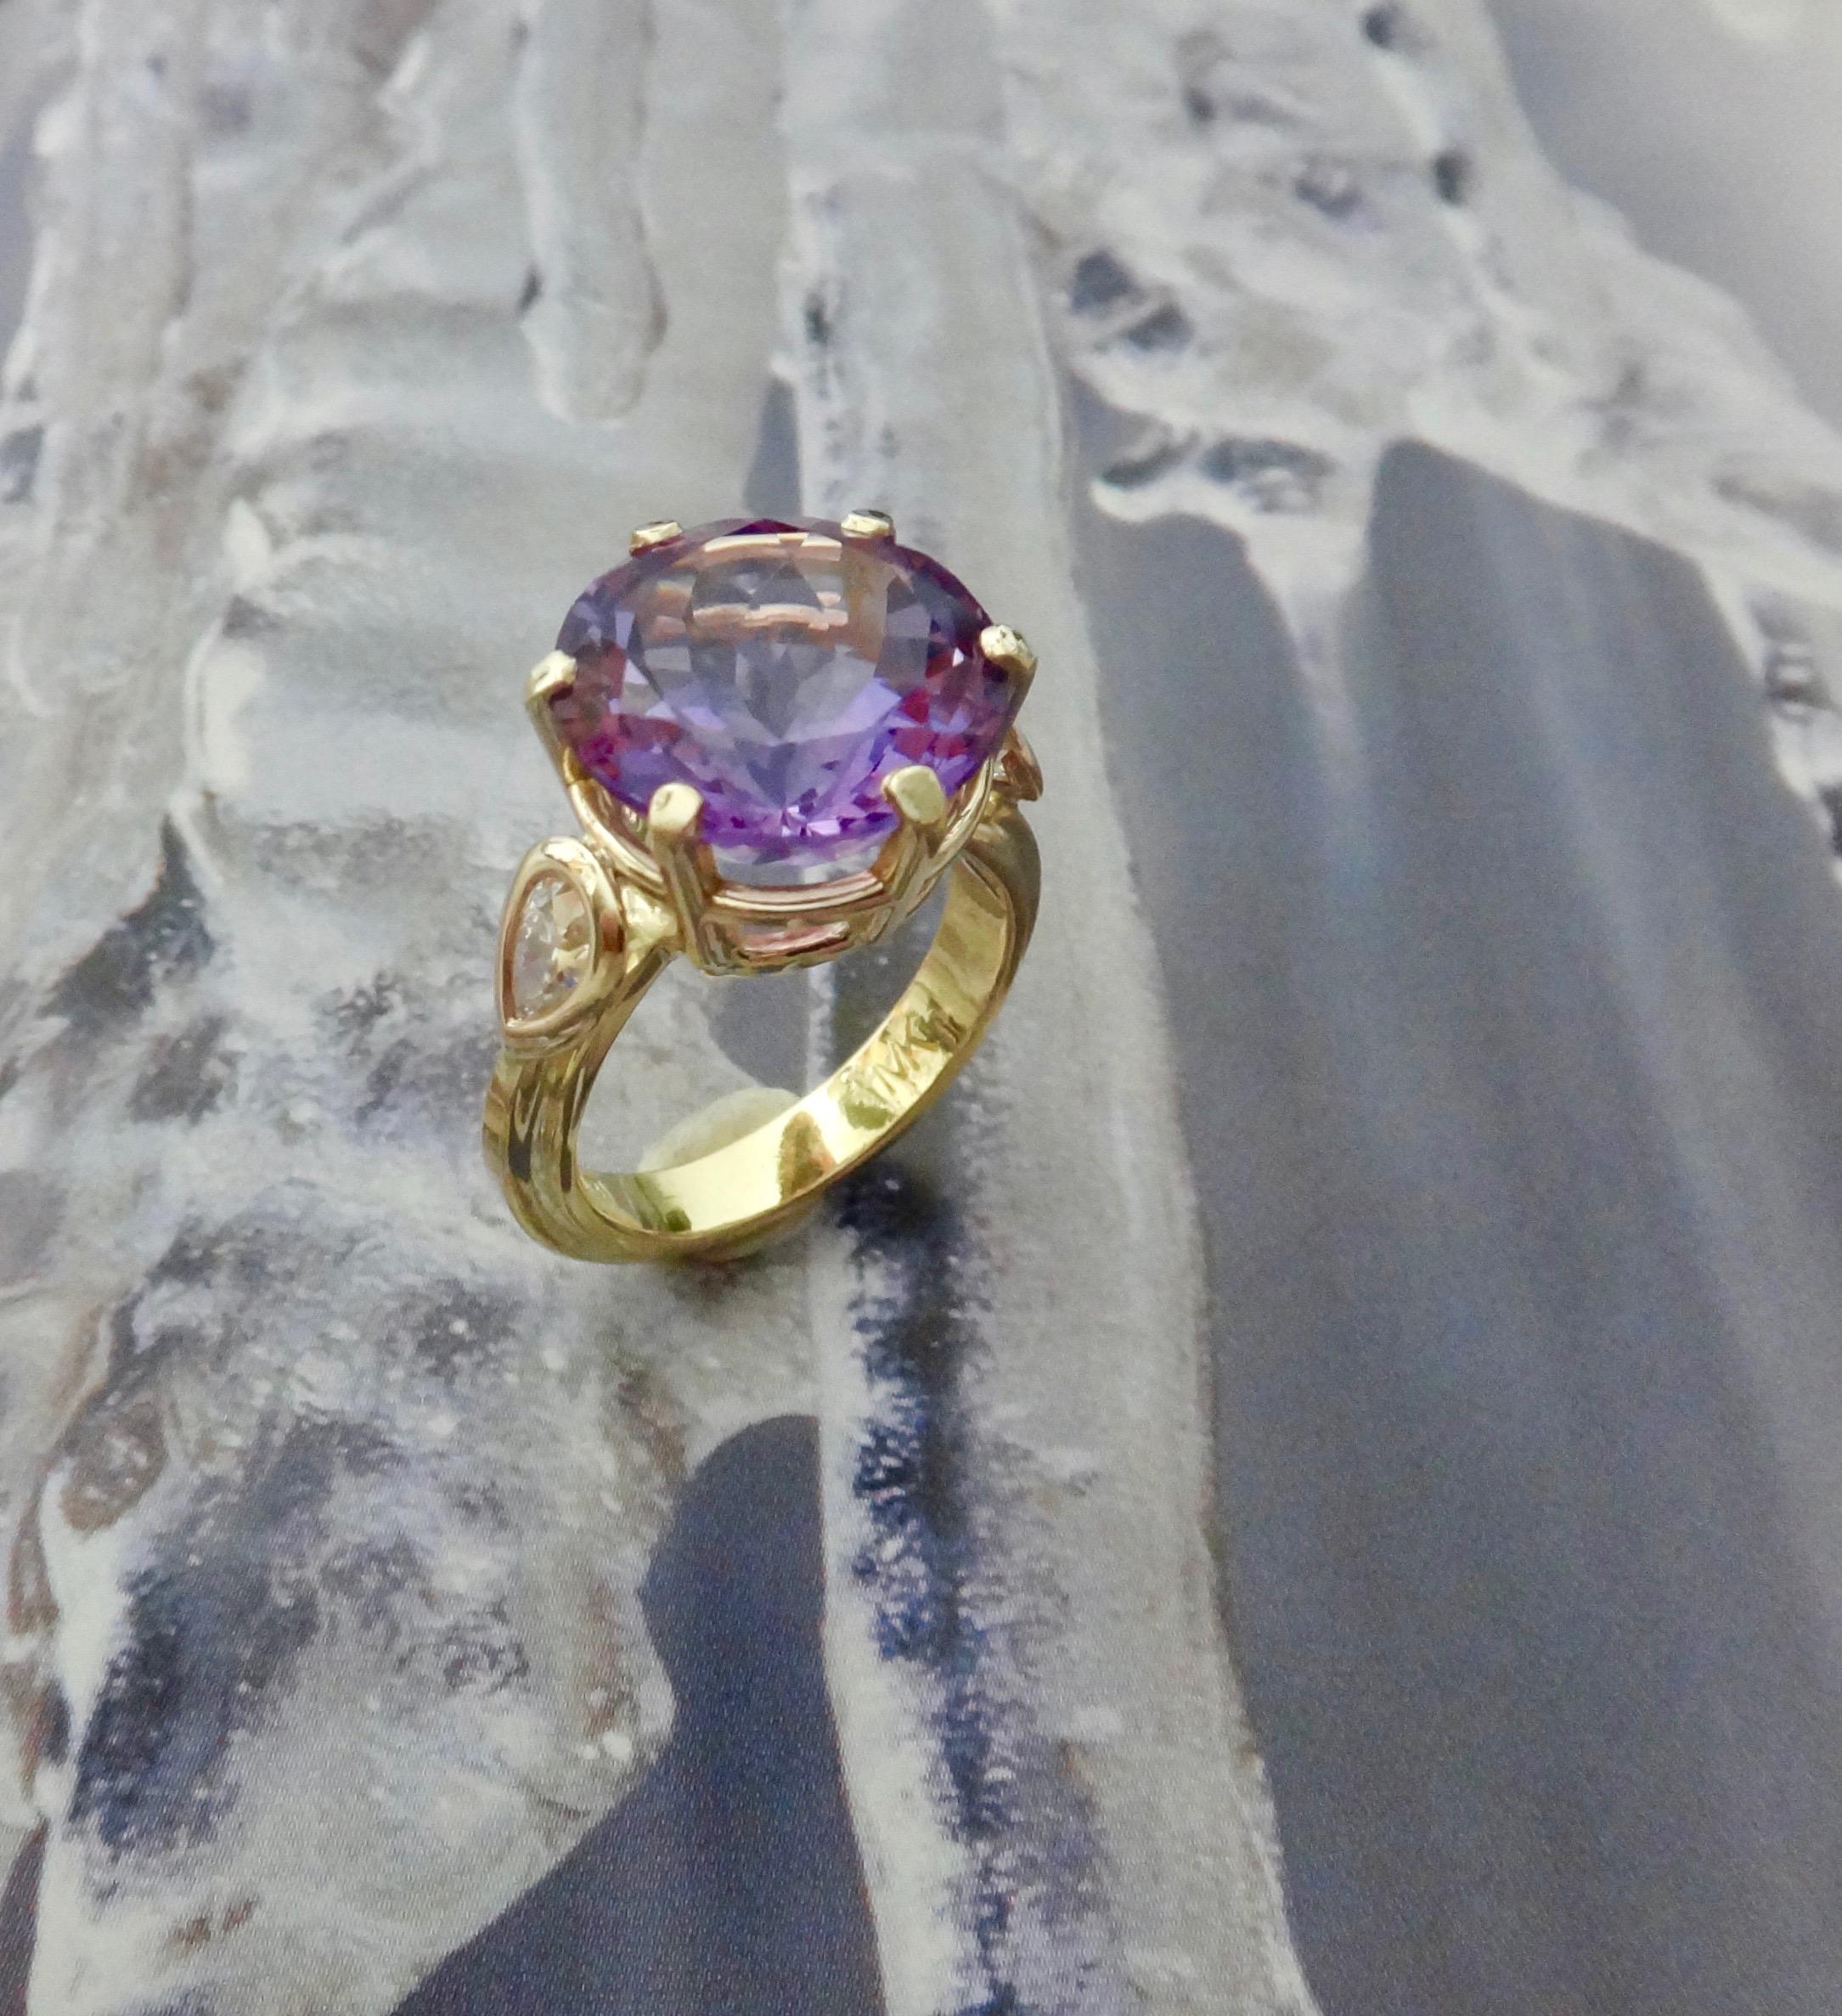 A round Portuguese cut amethyst is the centerpiece of this elegant cocktail ring.  The multitude of diamond shaped facets creates a very lively and flashy gem.  Flanking the center stone are two bezel set pair shaped diamonds.  The handmade 18k